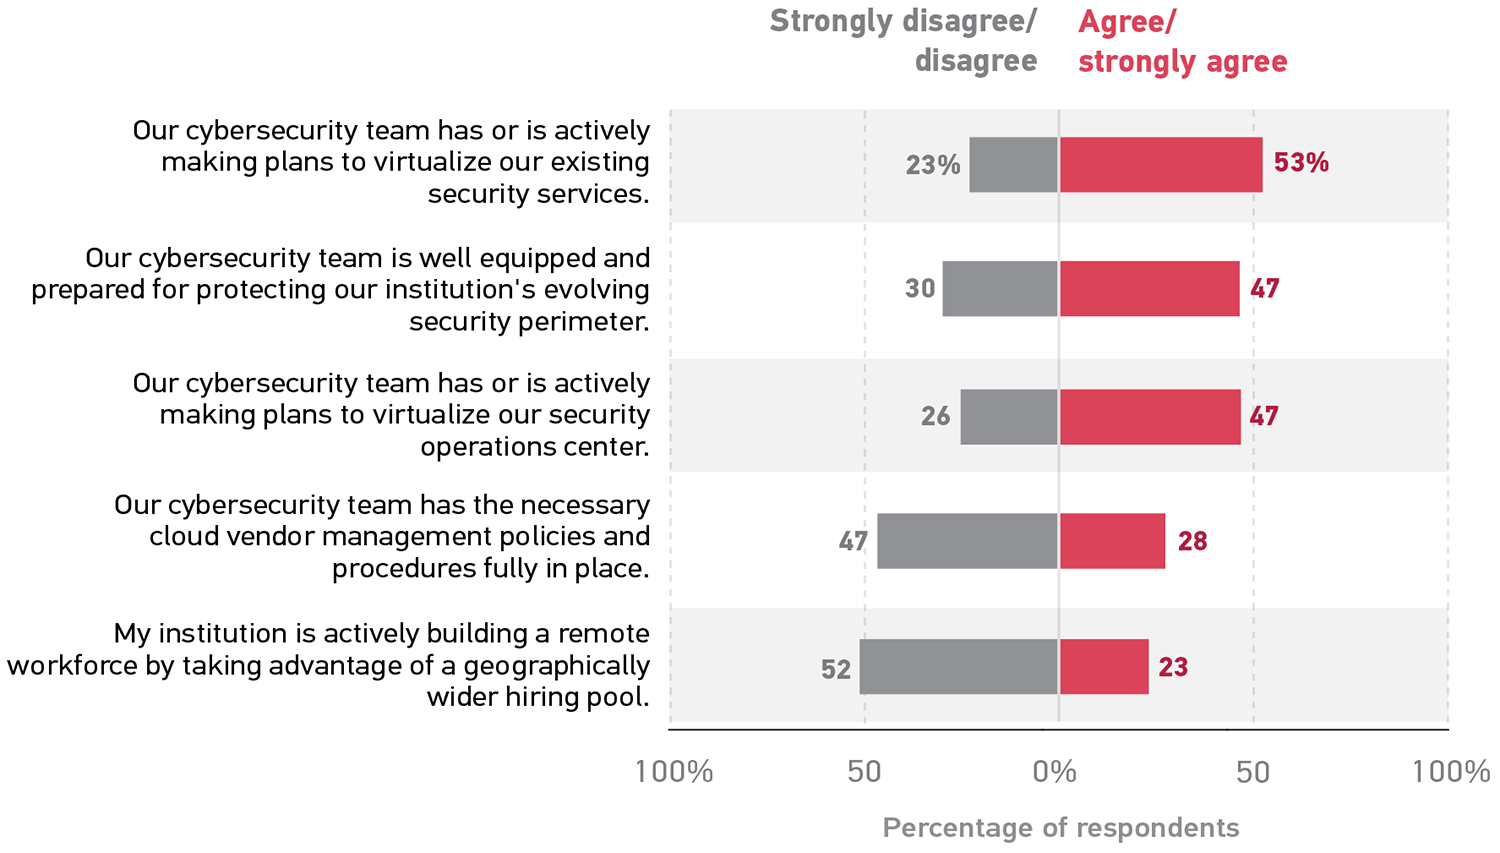 Bar graph showing the percentage of respondents who Strongly disagree/disagree (D) or Agree/strongly agree (A) with each statement.  Our cybersecurity team has or is actively making plans to virtualize our existing security services. D 23%, A 53%.  Our cybersecurity team is well equipped and prepared for protecting our institution's evolving security perimeter.  D 30%, A 47%.  Our cybersecurity team has or is actively making plans to virtualize our security operations center.  D 26%, A 47%.  Our cybersecurity team has the necessary cloud vendor management policies and procedures fully in place.  D 47%, A 28%.  My institution is actively building a remote workforce by taking advantage of a geographically wider hiring pool.  D 52%, A 23%. 